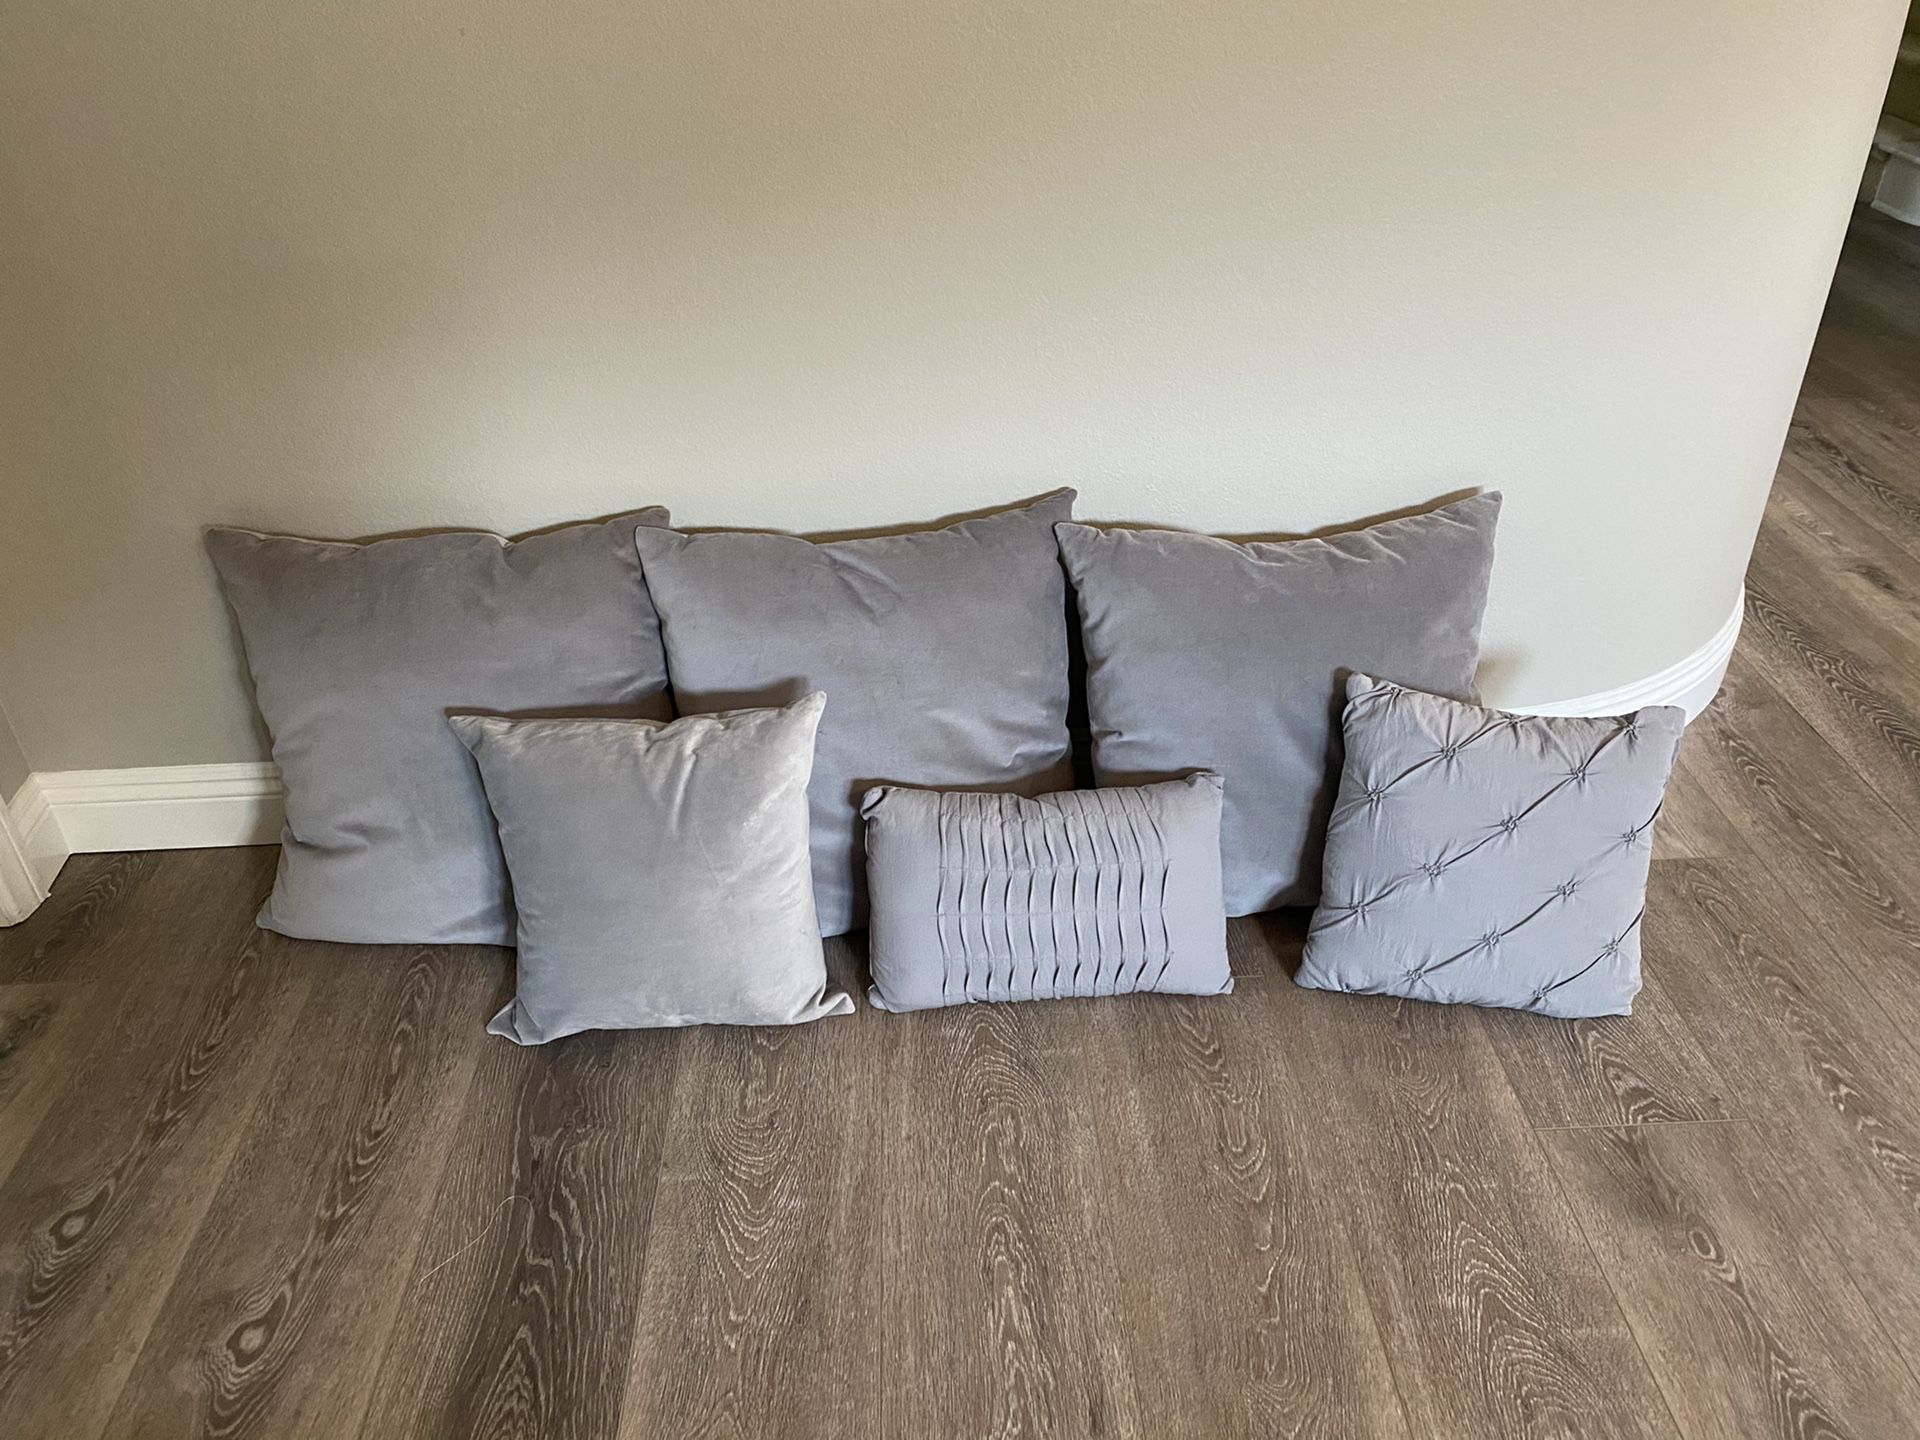 Grey assorted pillows - 6 total